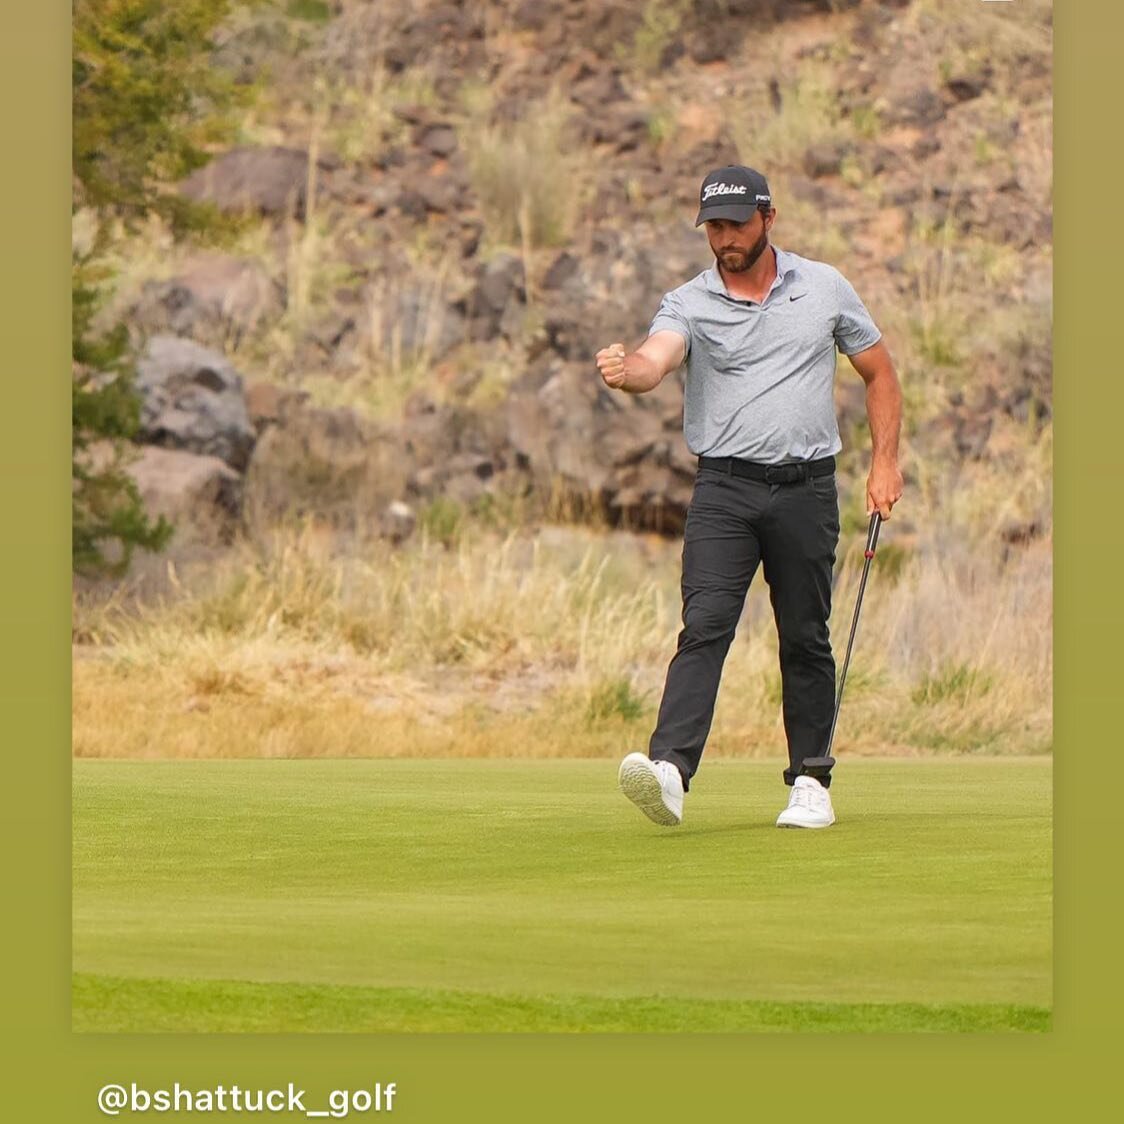 @bshattuck_golf &ldquo;Incredible experience this week in New Mexico with @ryanwilsun on the bag at the PGA Professional Championship at Twin Warriors Golf Club. Thank you for all the support and to everyone who has helped make this victory possible.